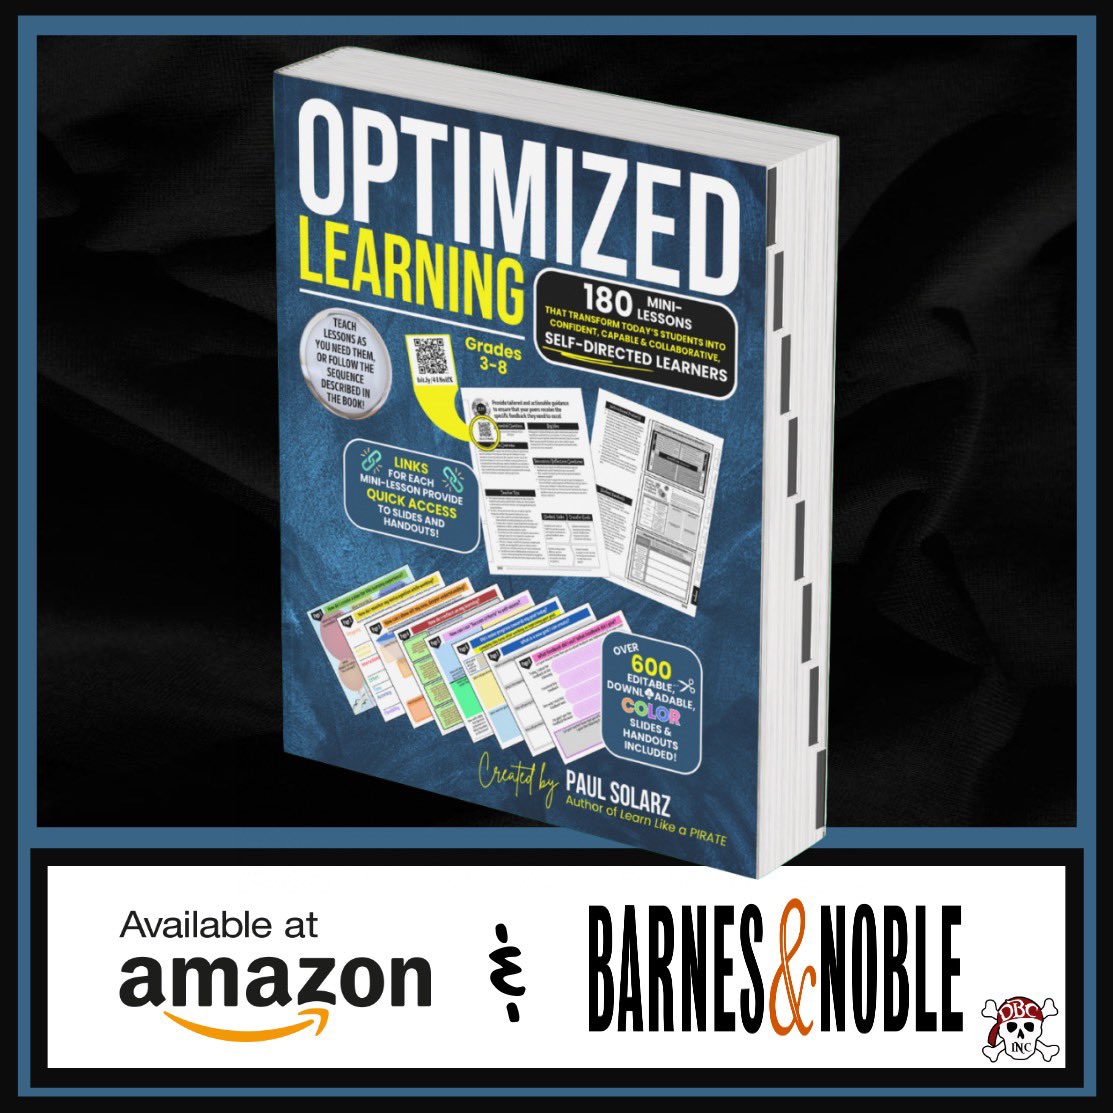 Hey #tlap crew! If you enjoyed Learn Like a Pirate by @PaulSolarz, he has created a HUGE POWERFUL new book called #OptimizedLearning with 180 mini-lessons. I mean...this is 447 pages!!! It is an incredible resource. 
a.co/d/chhvsMn
#LearnLAP #dbcincbooks @dbc_inc